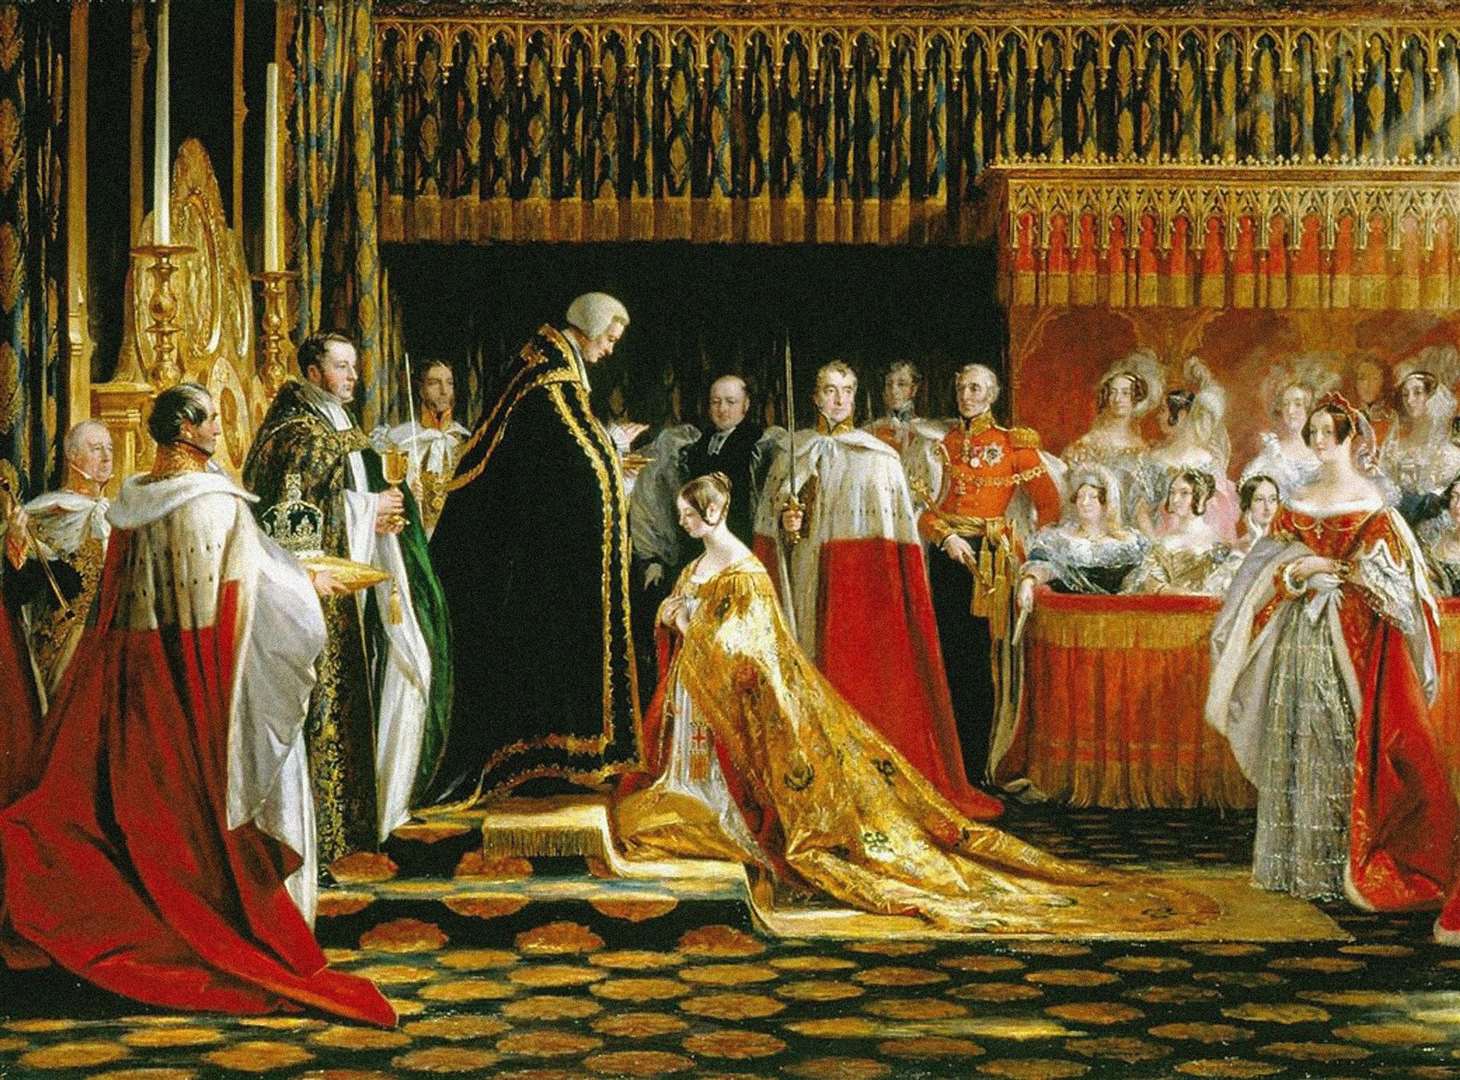 Queen Victoria receiving the Sacrament at her Coronation in 1838 (Painters/Alamy Stock Photo/PA)